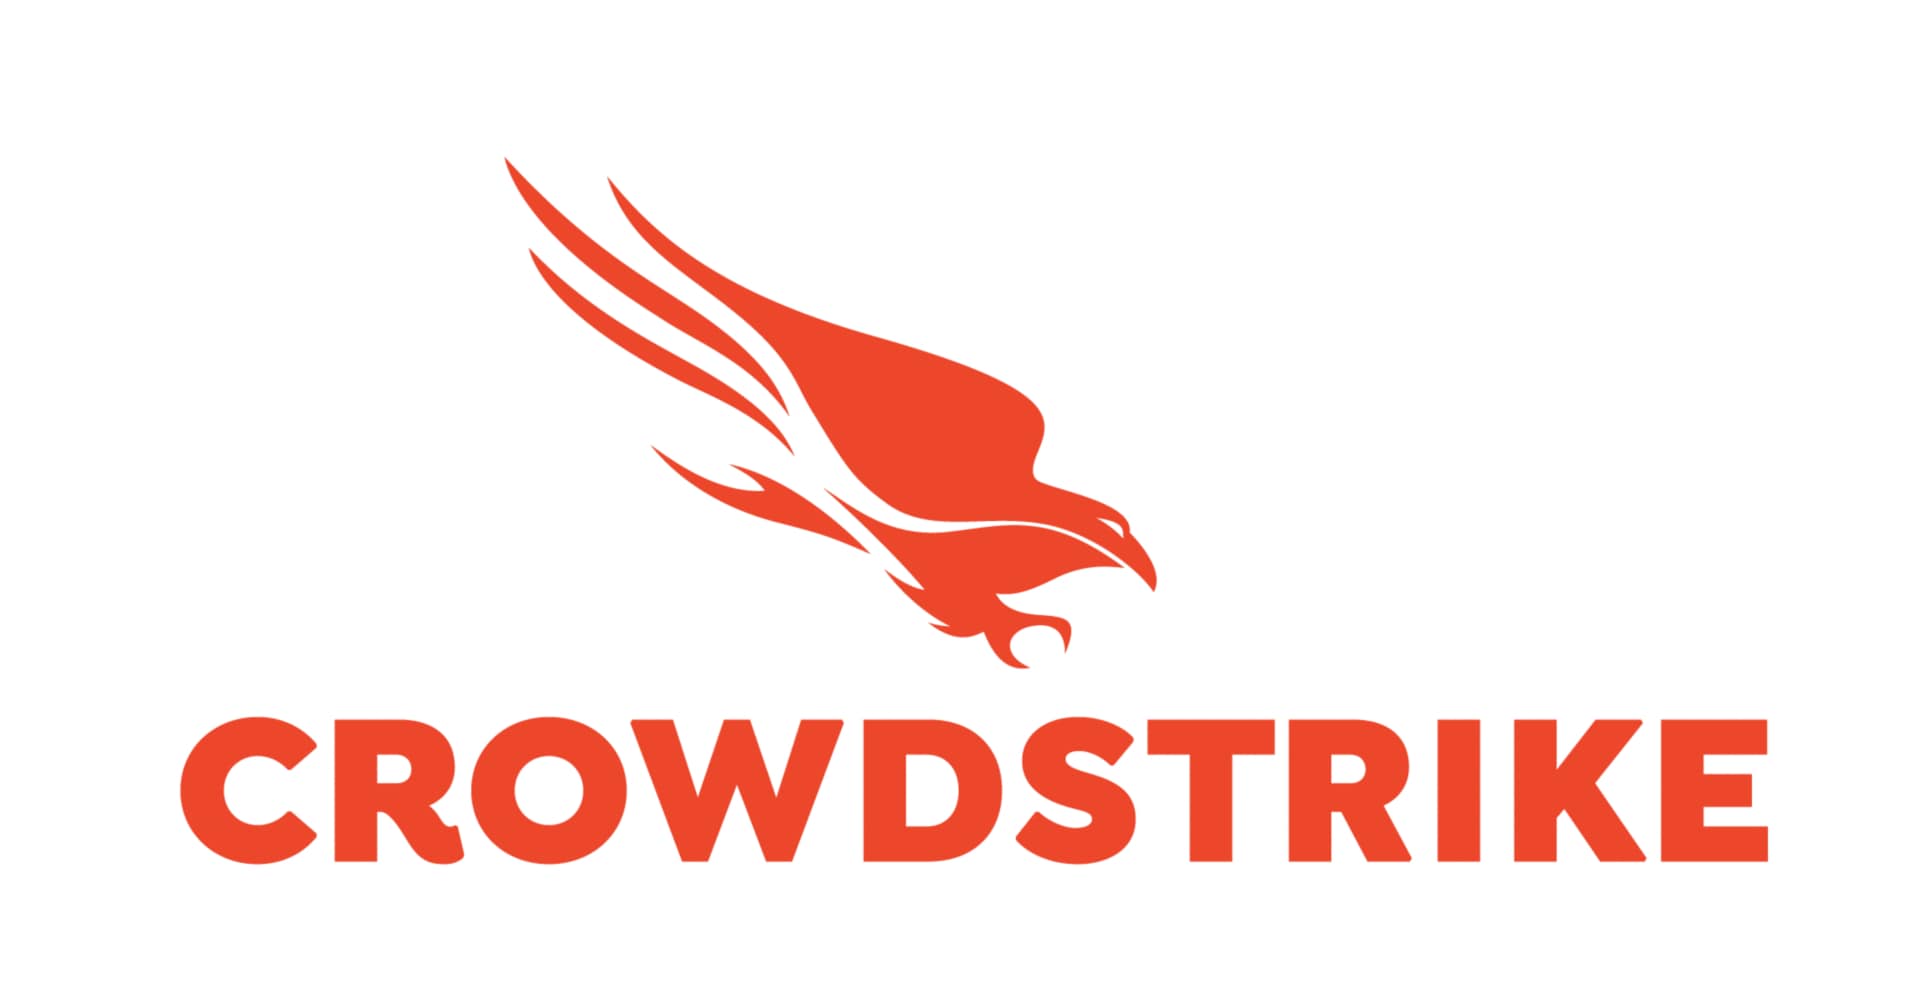 CrowdStrike 6-Month Falcon Device Control Software Subscription